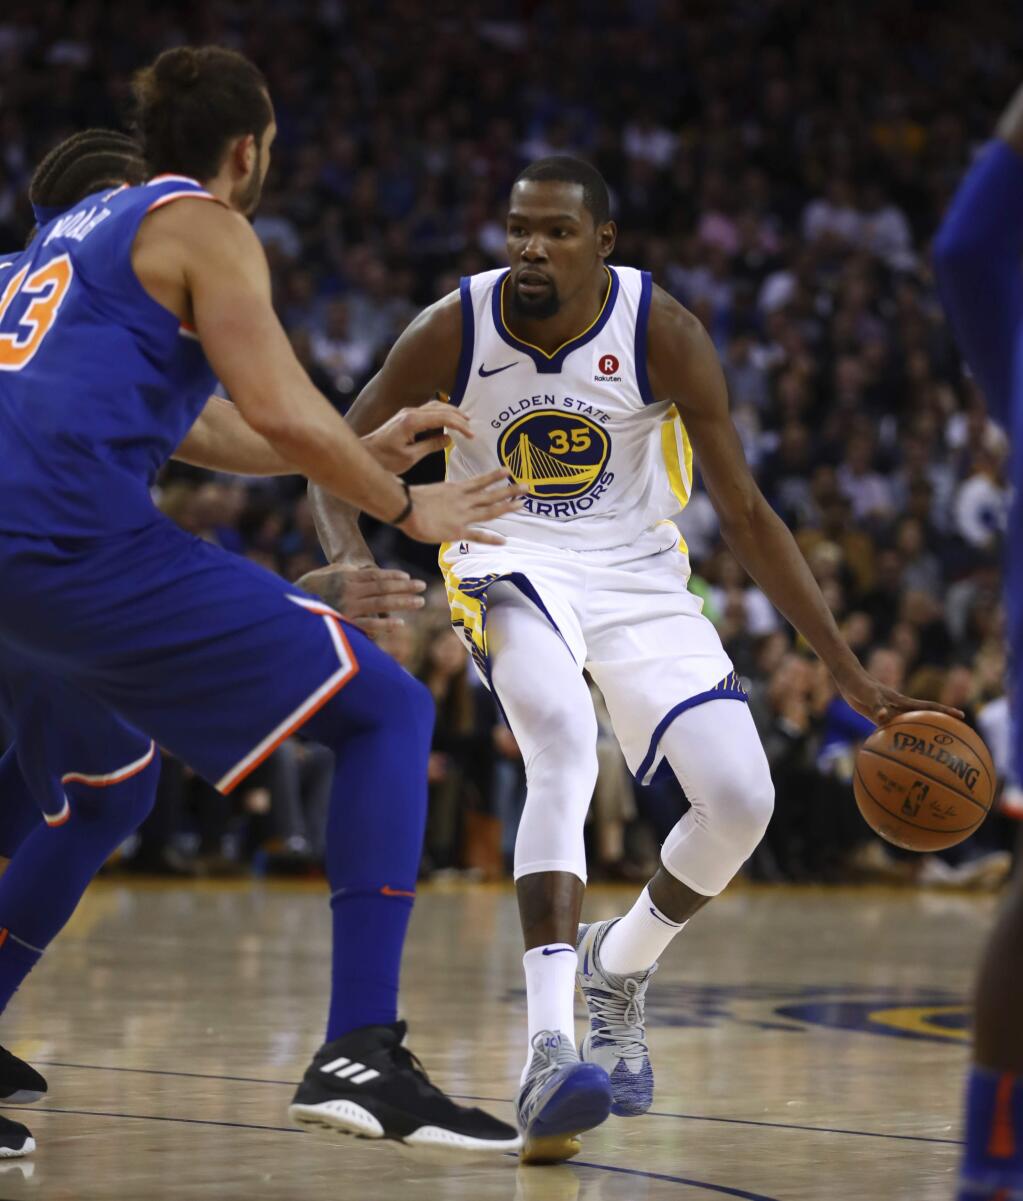 Golden State Warriors forward Kevin Durant, right, drives the ball against New York Knicks center Joakim Noah during the second half Tuesday, Jan. 23, 2018, in Oakland. (AP Photo/Ben Margot)